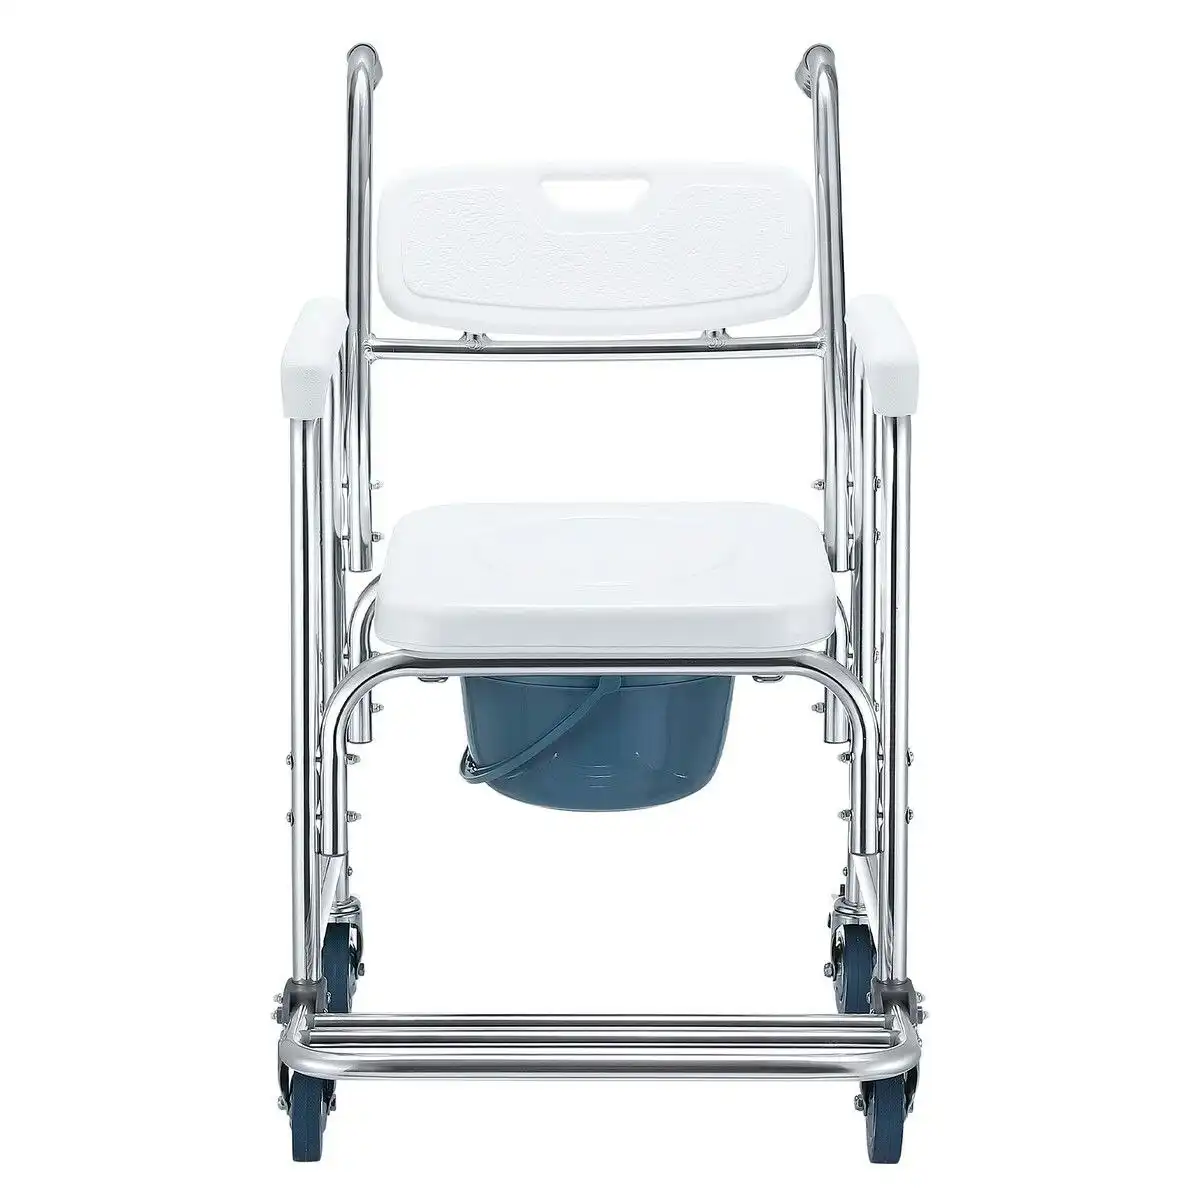 Ausway Commode Shower Chair Toilet Wheelchair 3 in 1 Bath Stool Bathroom Bedside Seat Seating Furniture Folding with Arms